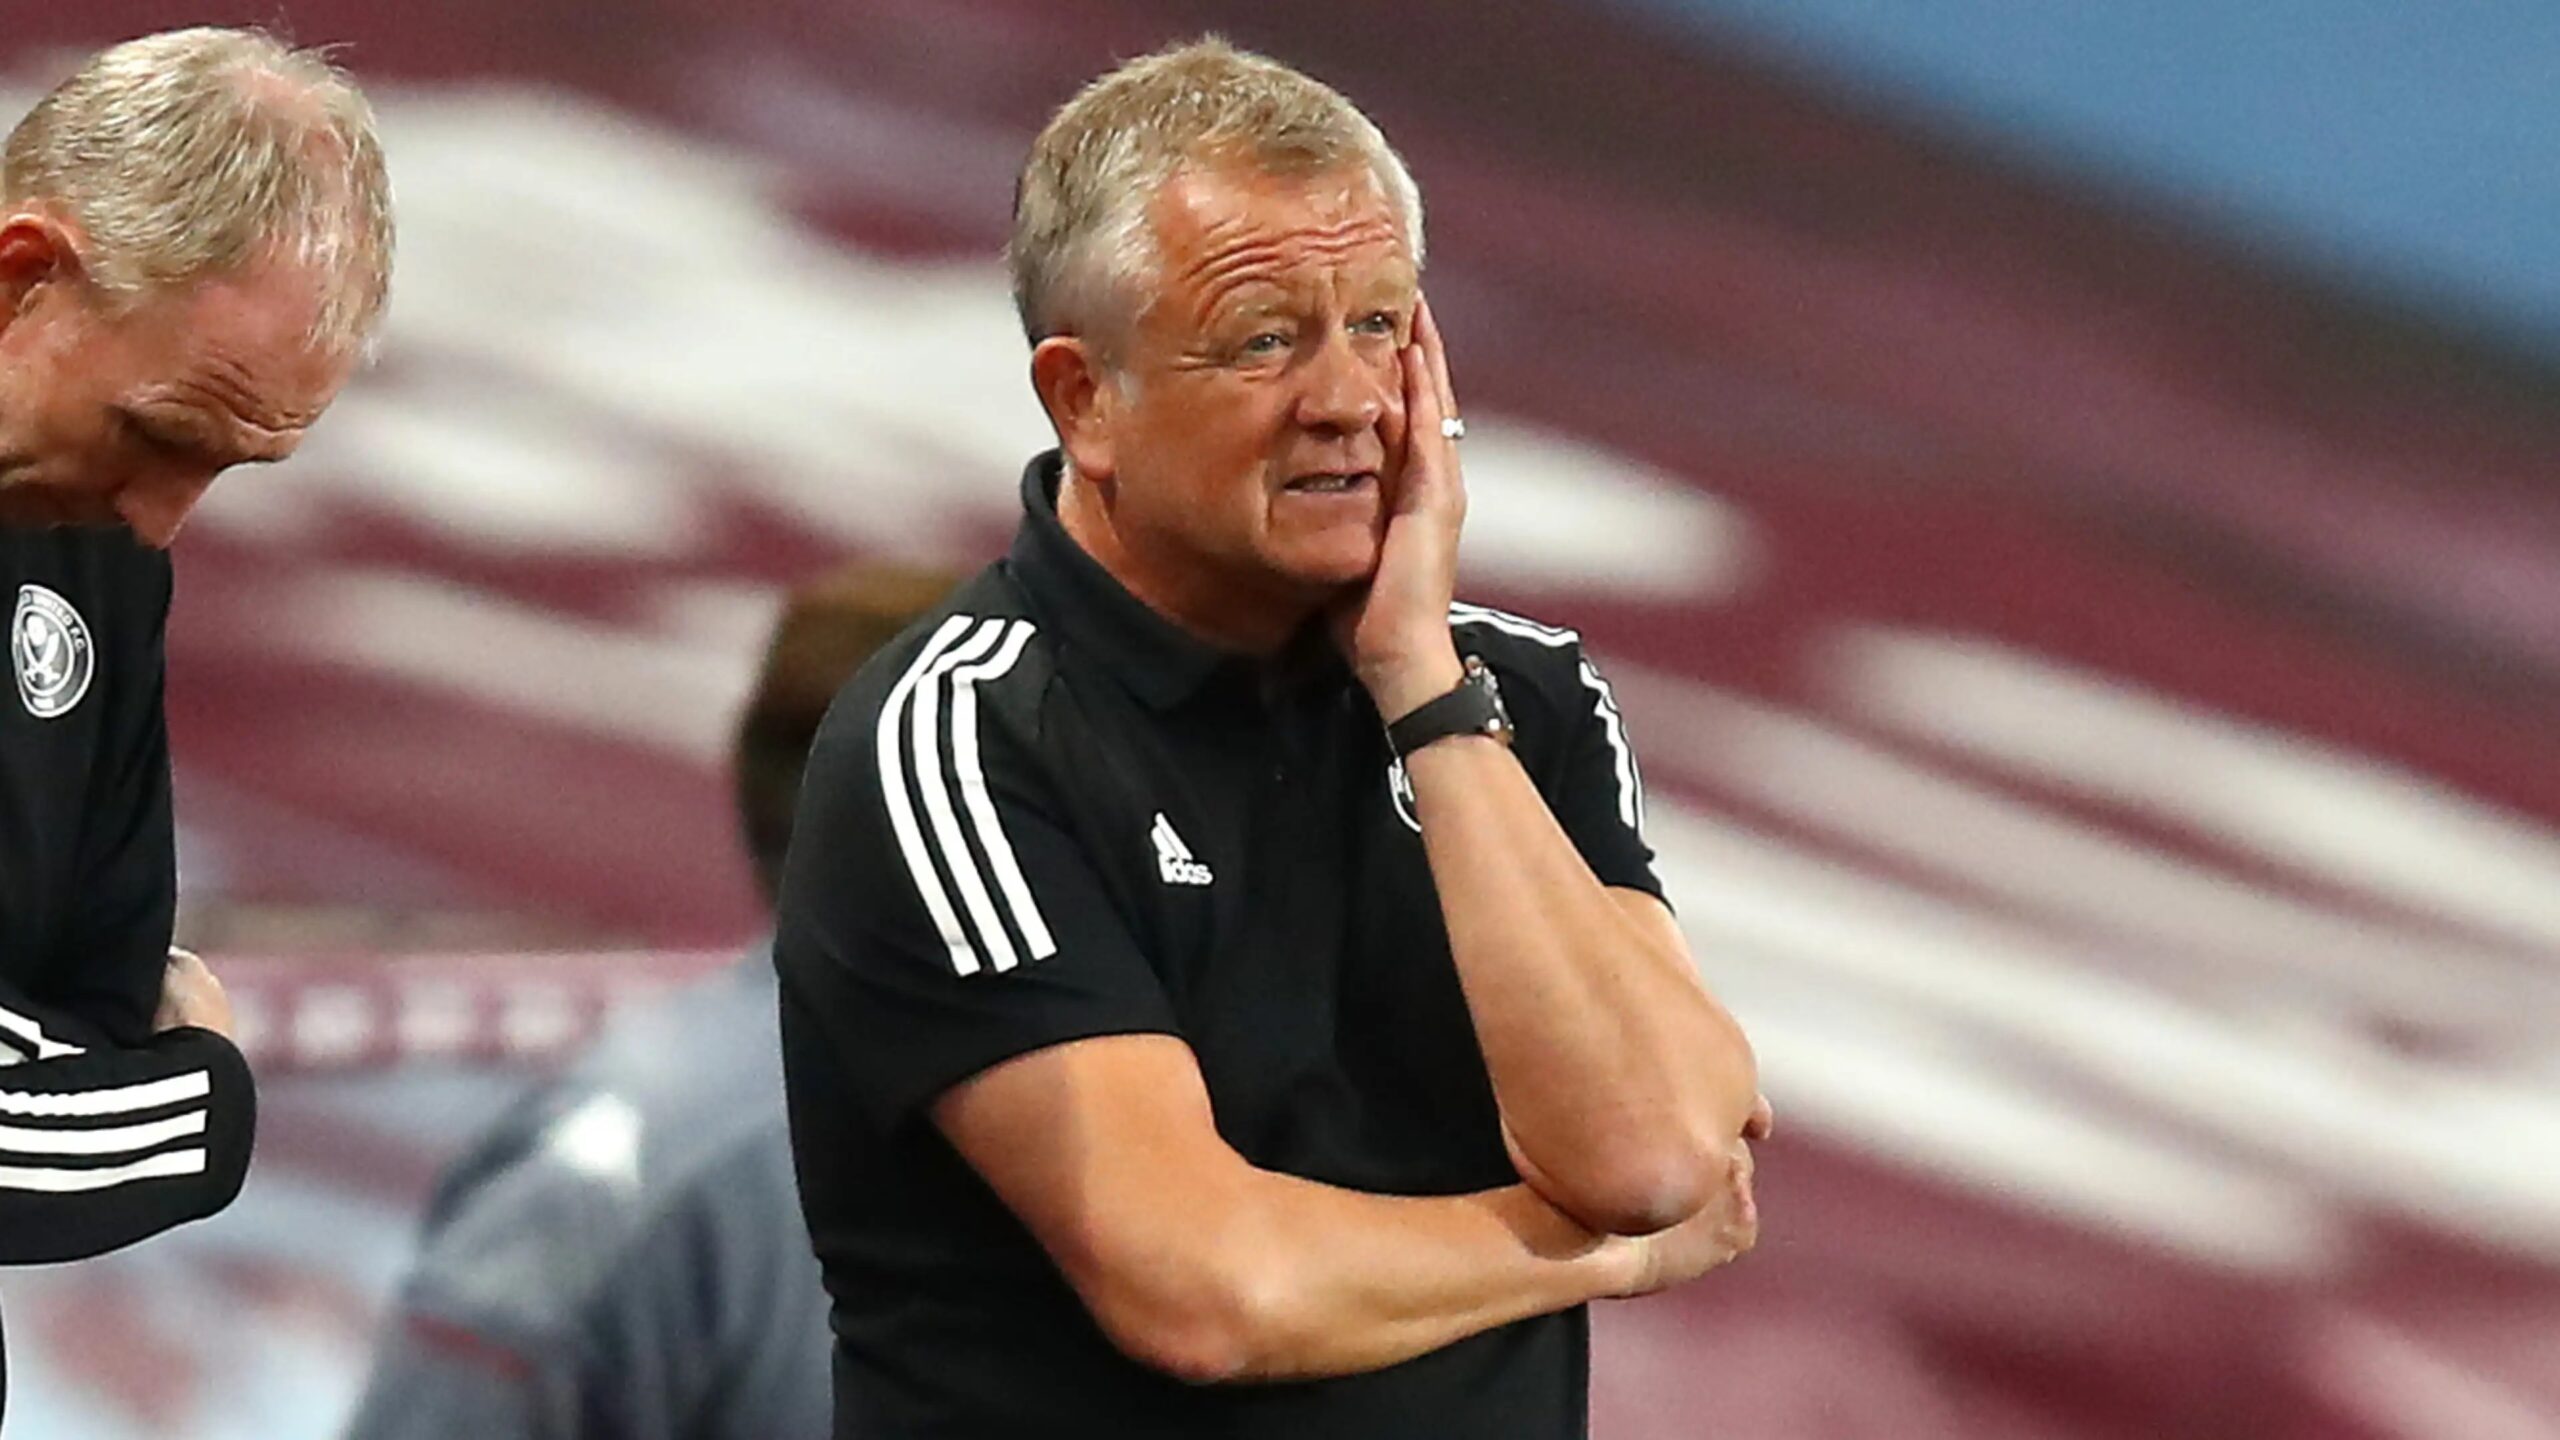 LATEST NEWS: Chris Wilder the head coach of sheffield united blem this top three key player after a big lose against Newcastle 5-1